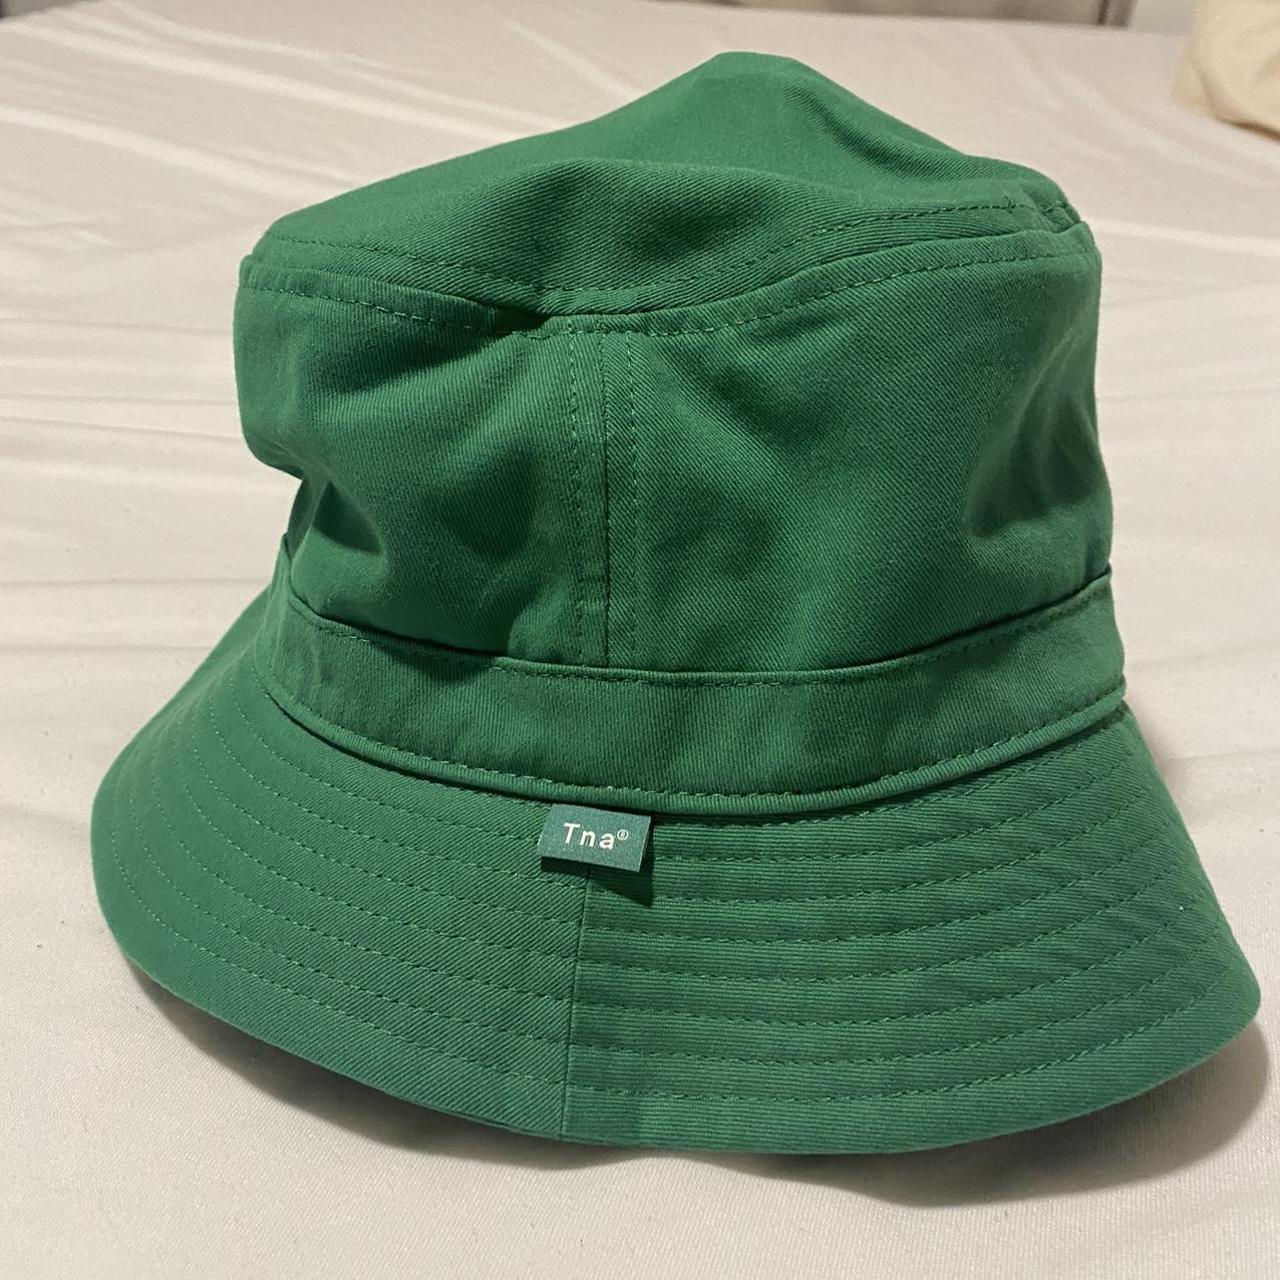 ARITZIA TNA Banded bucket hat BRAND NEW Bought for $25 - Depop